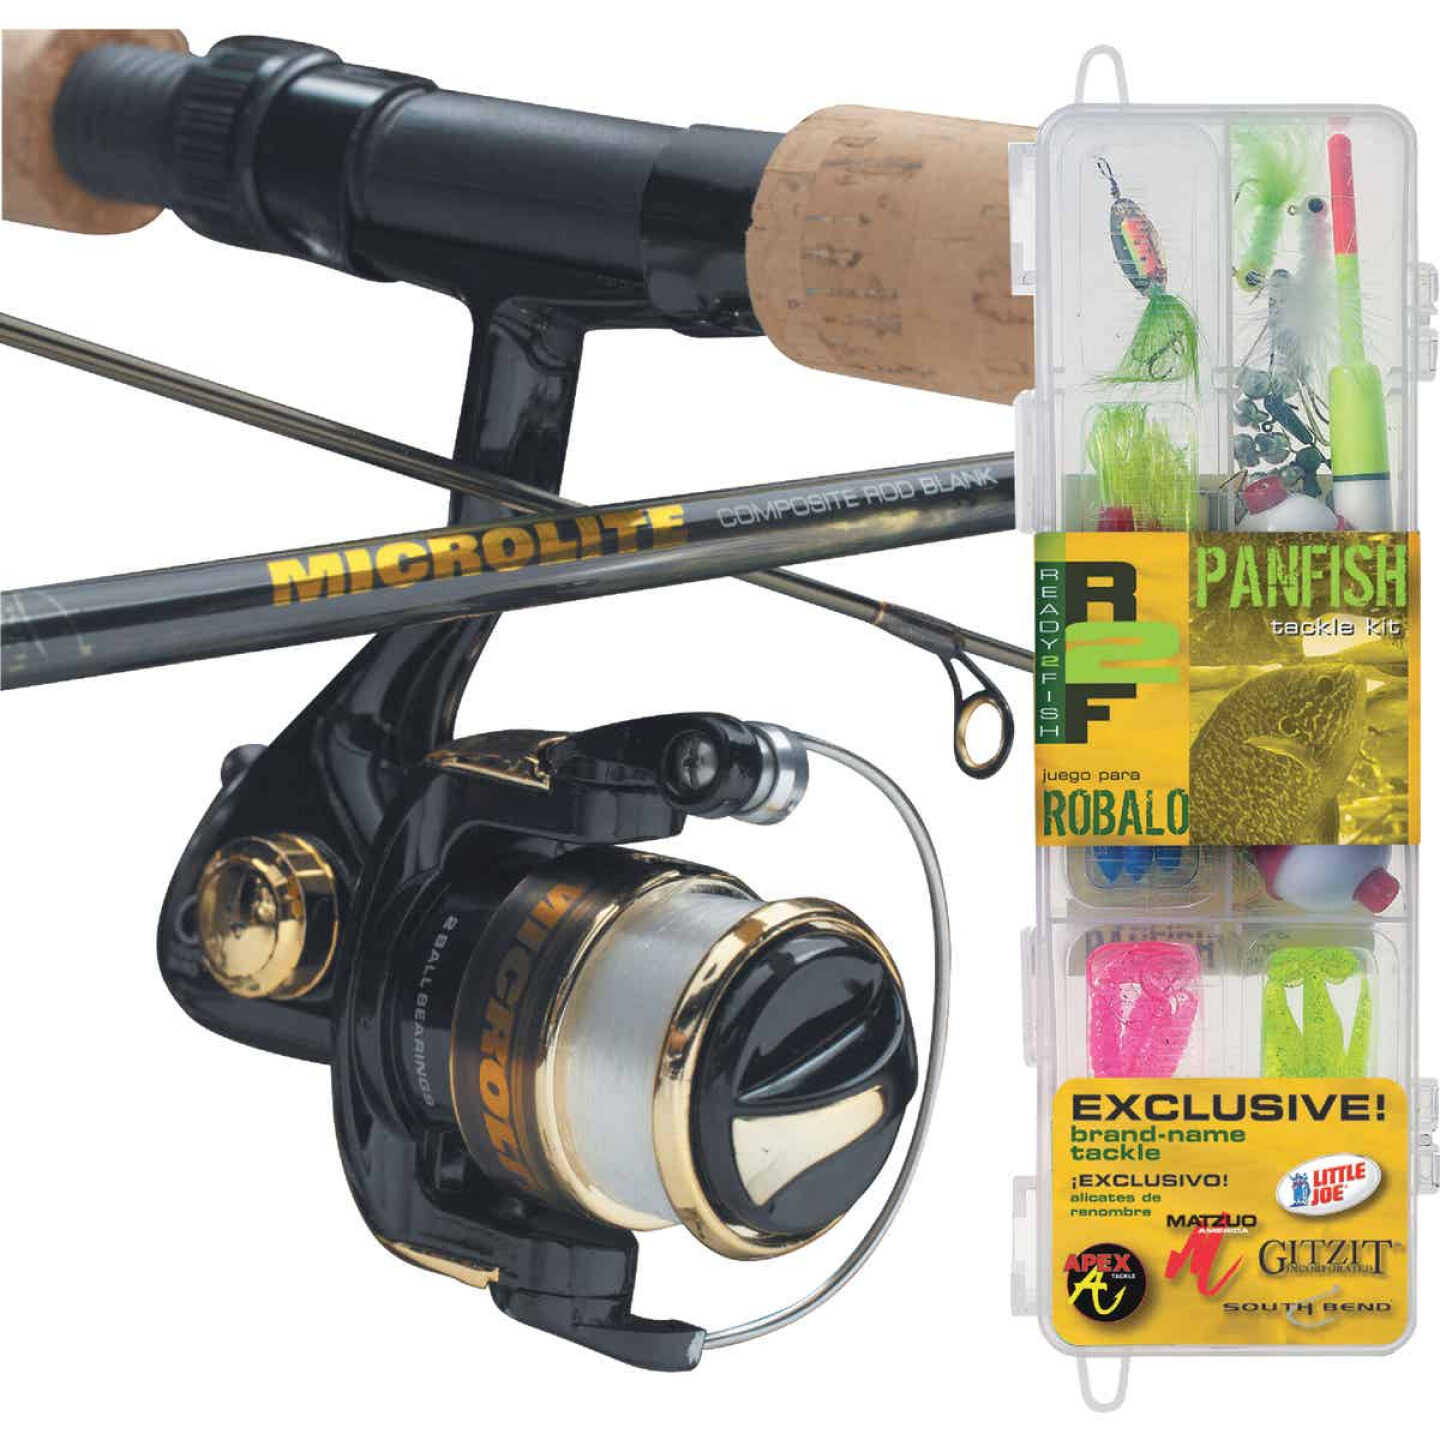 Modern fishing tackle items including line weights and sinkers.